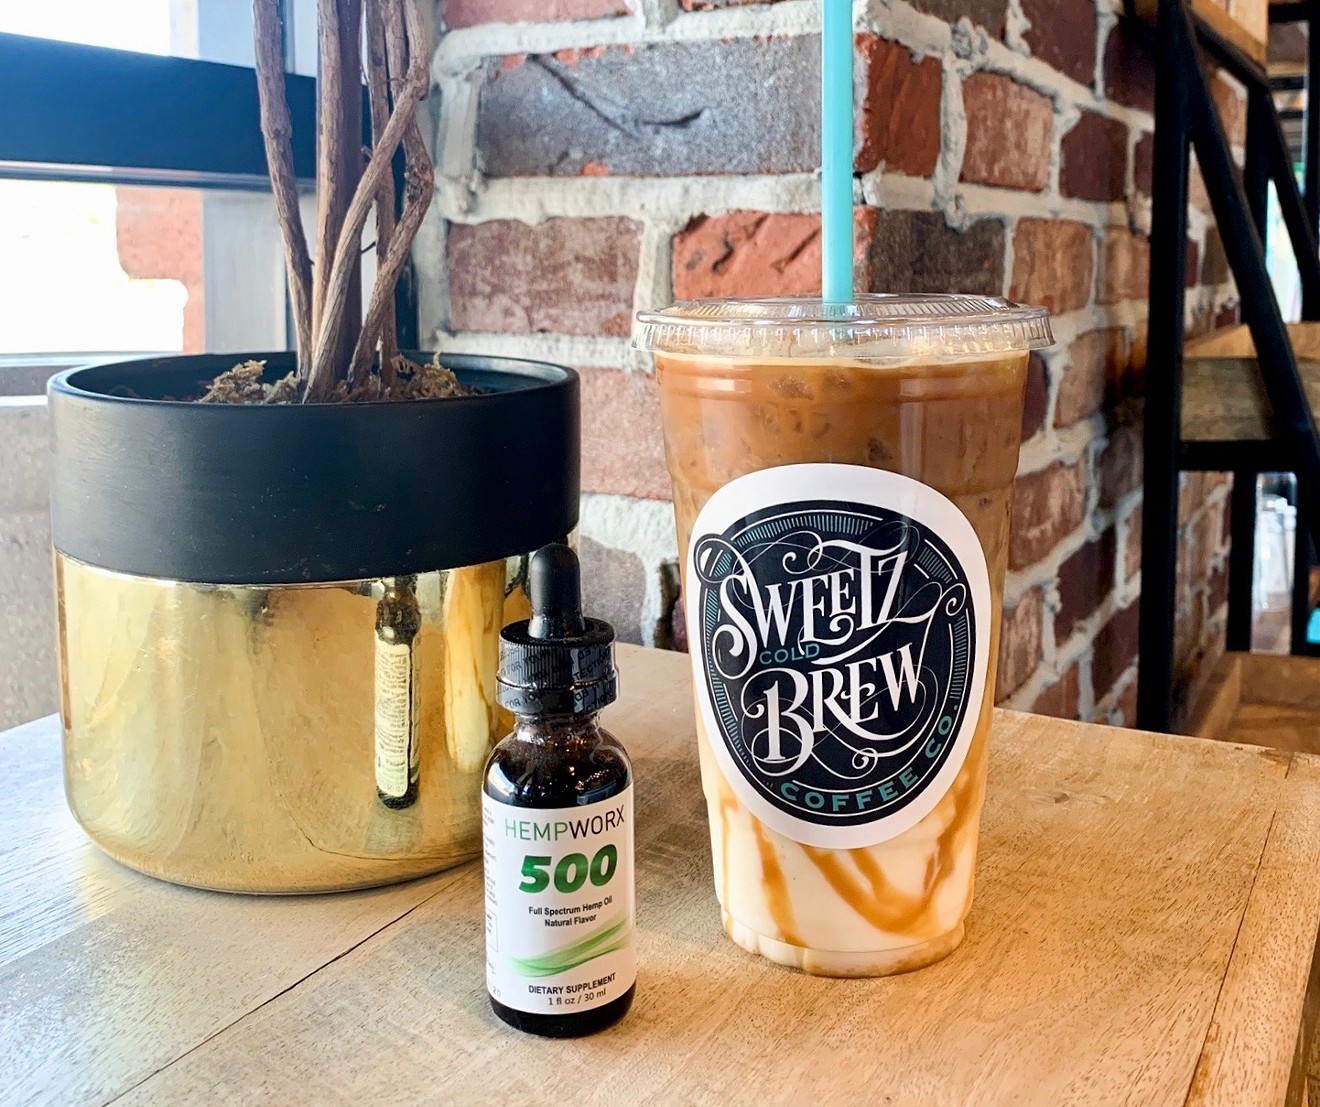 Trip launches CBD-infused cold brew coffee - FoodBev Media